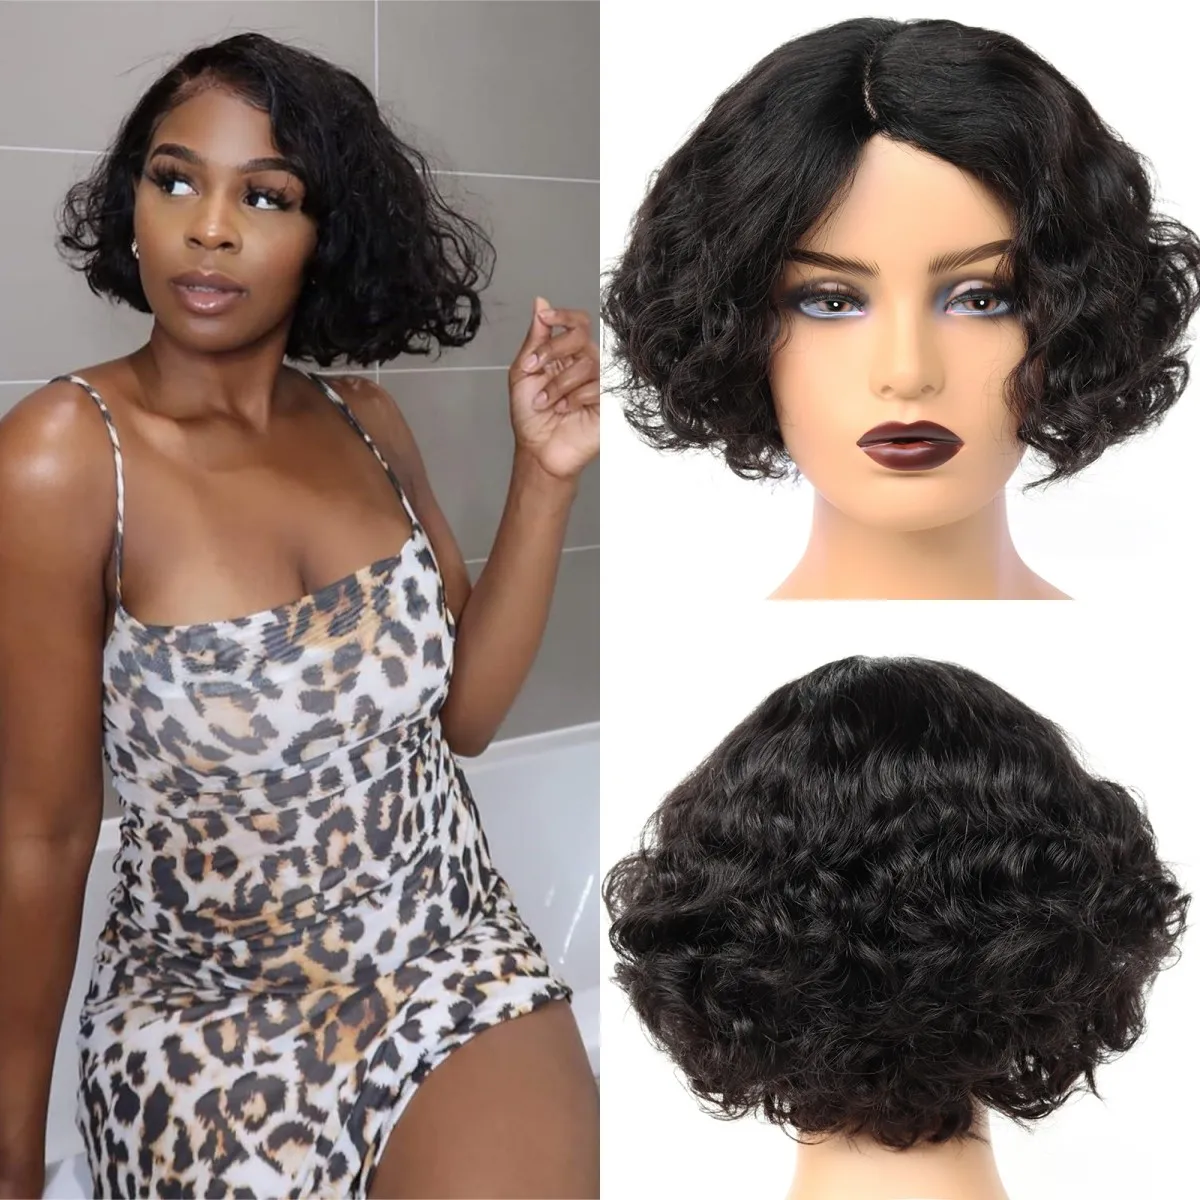 

Black Bob Lace Front Human Hair Wig Short Curly Natural Human Hair Middle Part Daily Use Human Hair for Black Women Afro Wigs